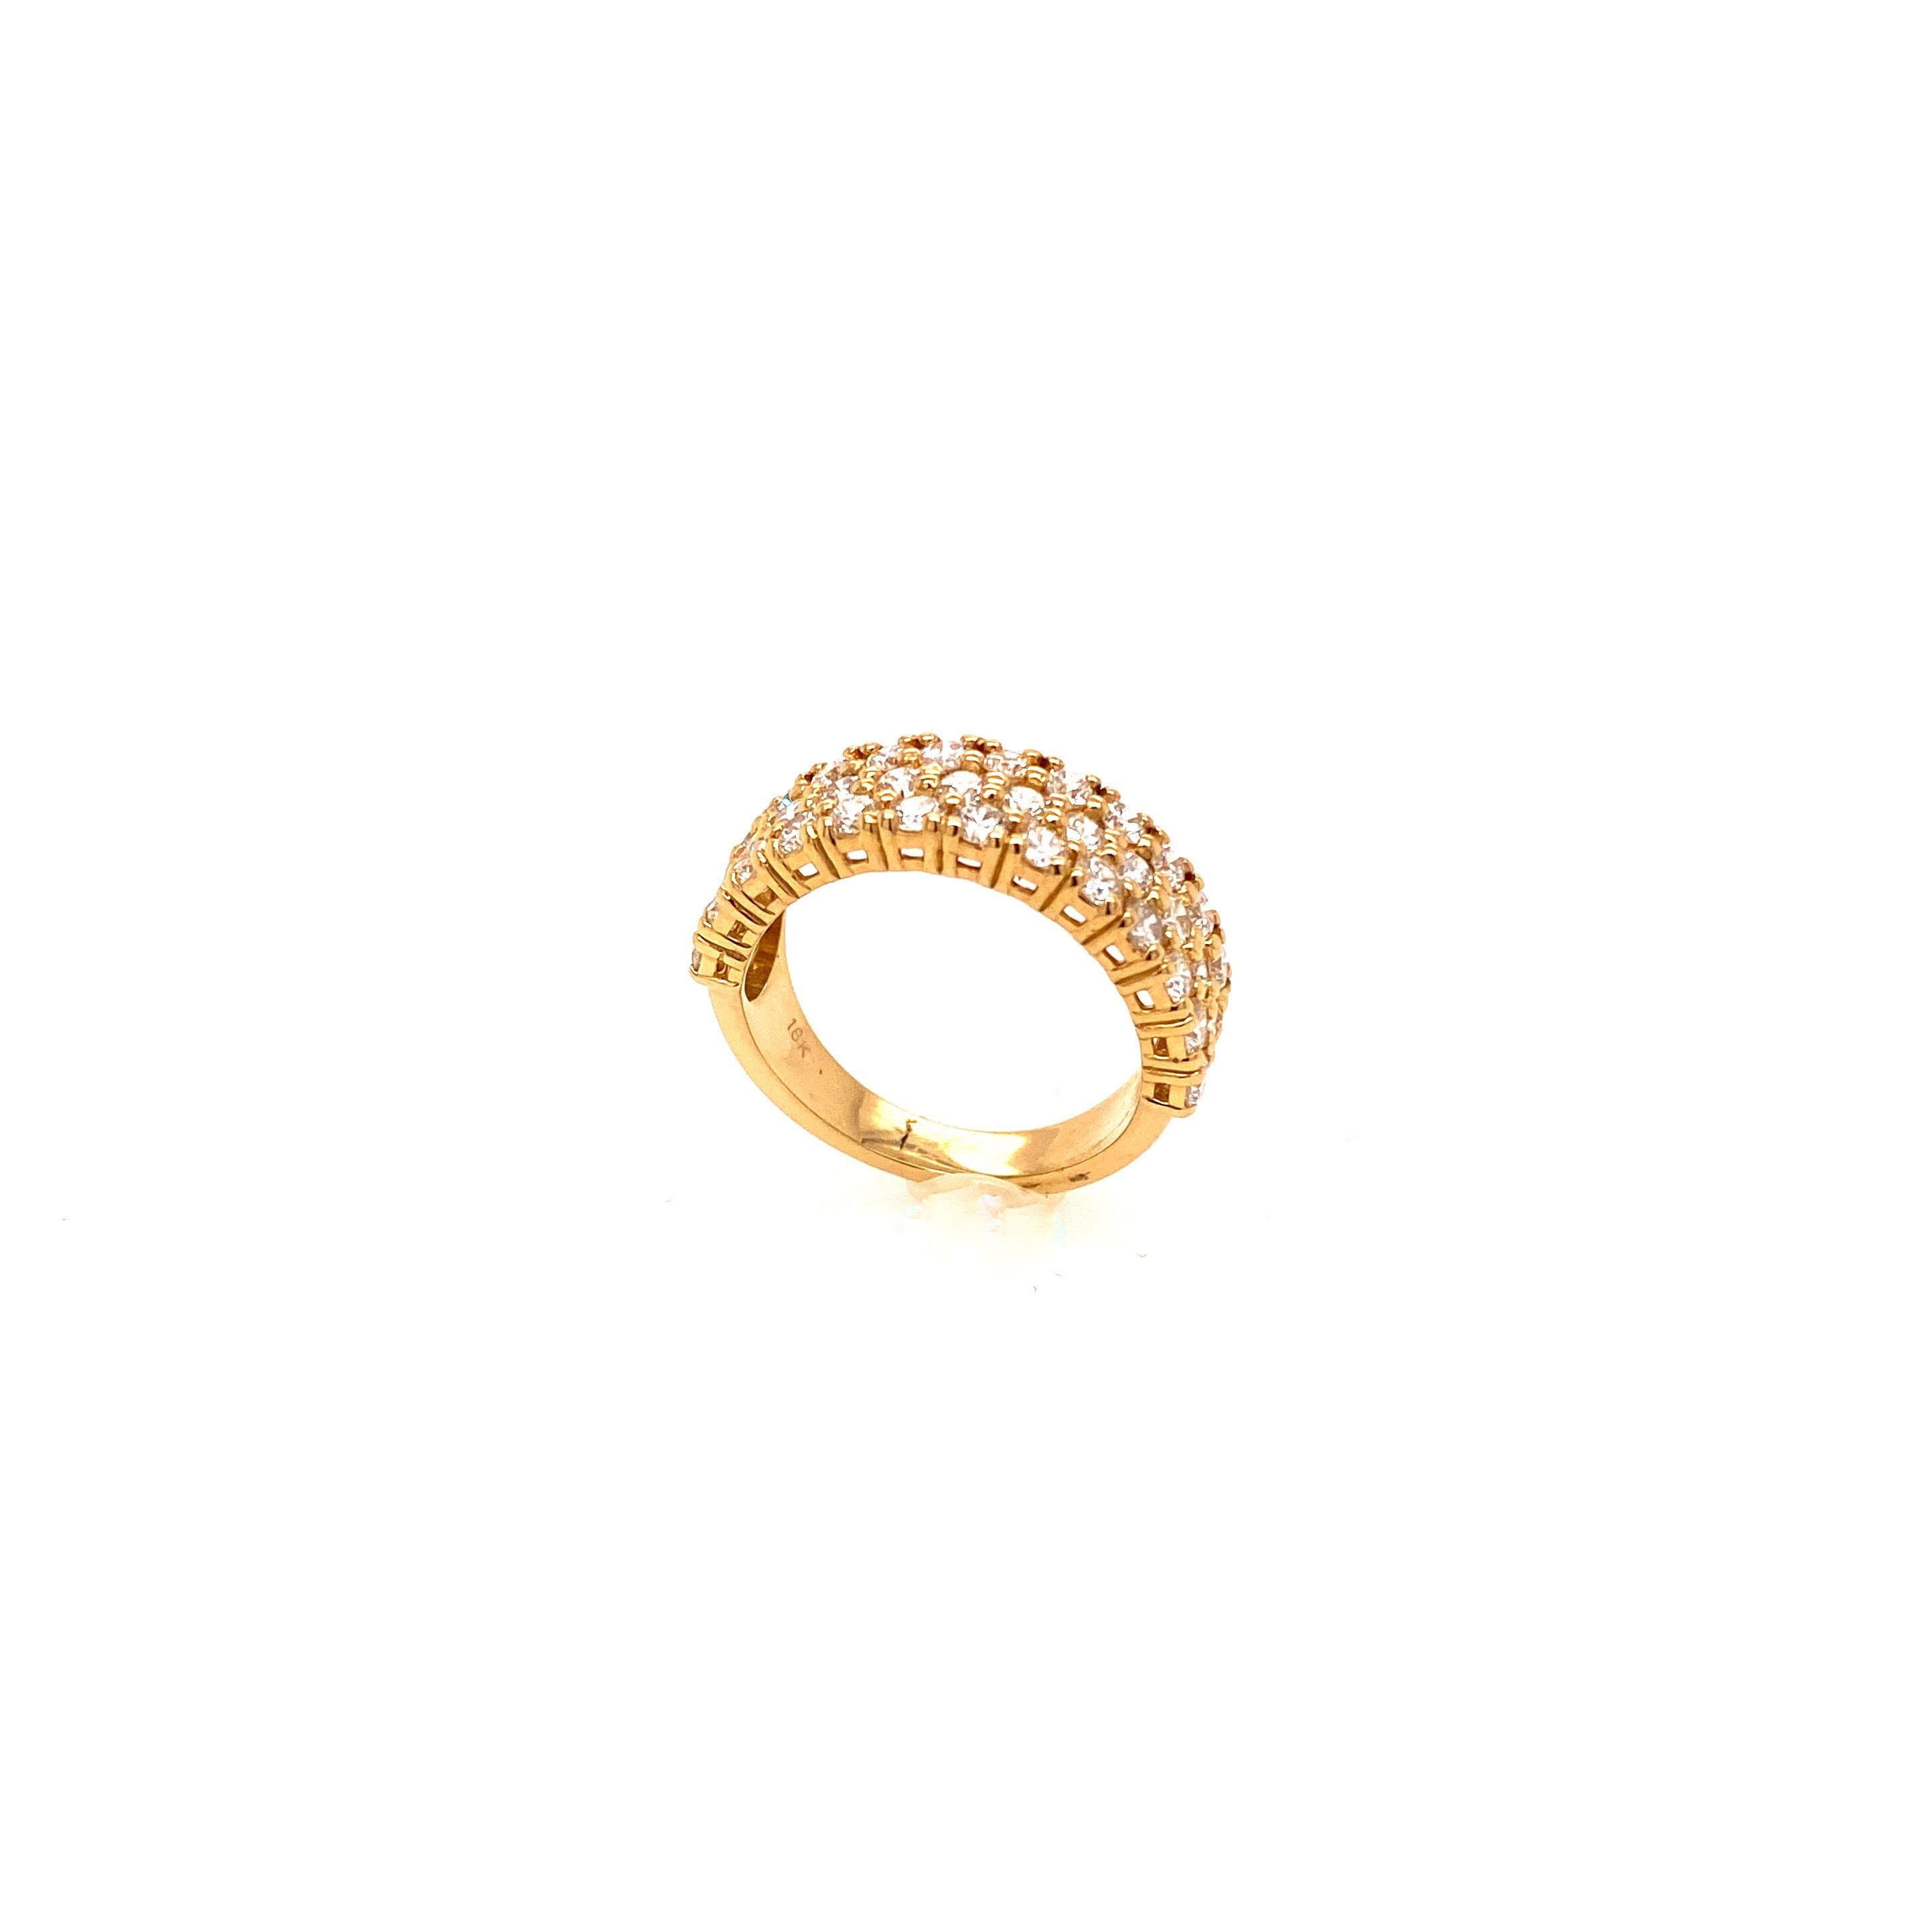 18K yellow gold triple row band ring containing thirty-eight round brilliant cut diamonds weighing 1.85 carats. Simple and classy. Very comfortable to wear in everyday. 

Diamond Shape: Brilliant Round
Diamond Color & Clarity: F-G, VS-SI

Diamond